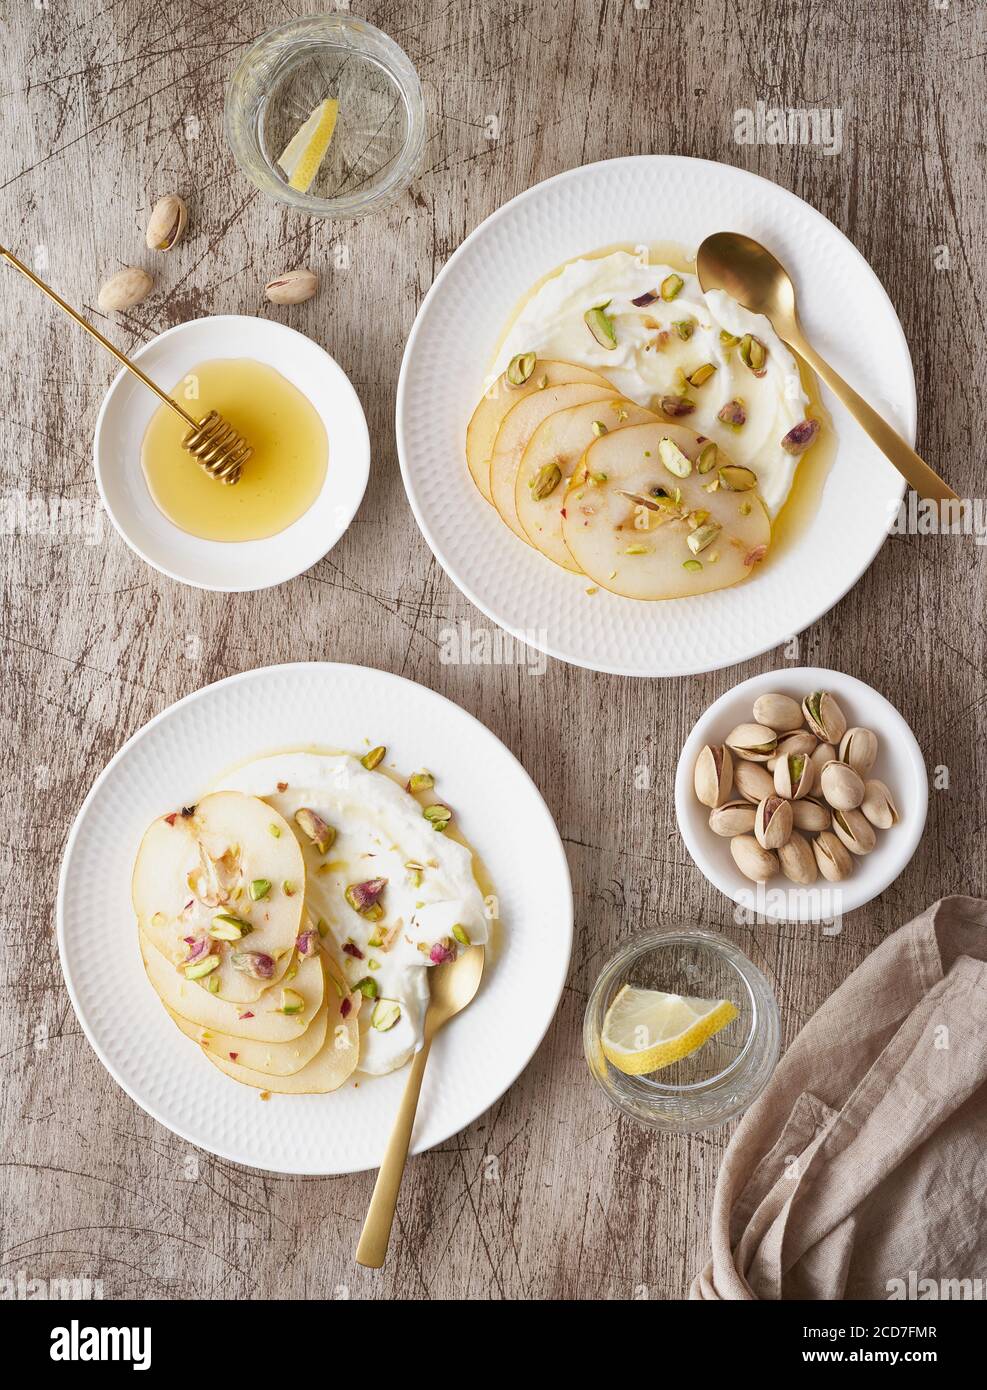 Ricotta with pears, pistachios and honey or maple syrup on two white plate Stock Photo